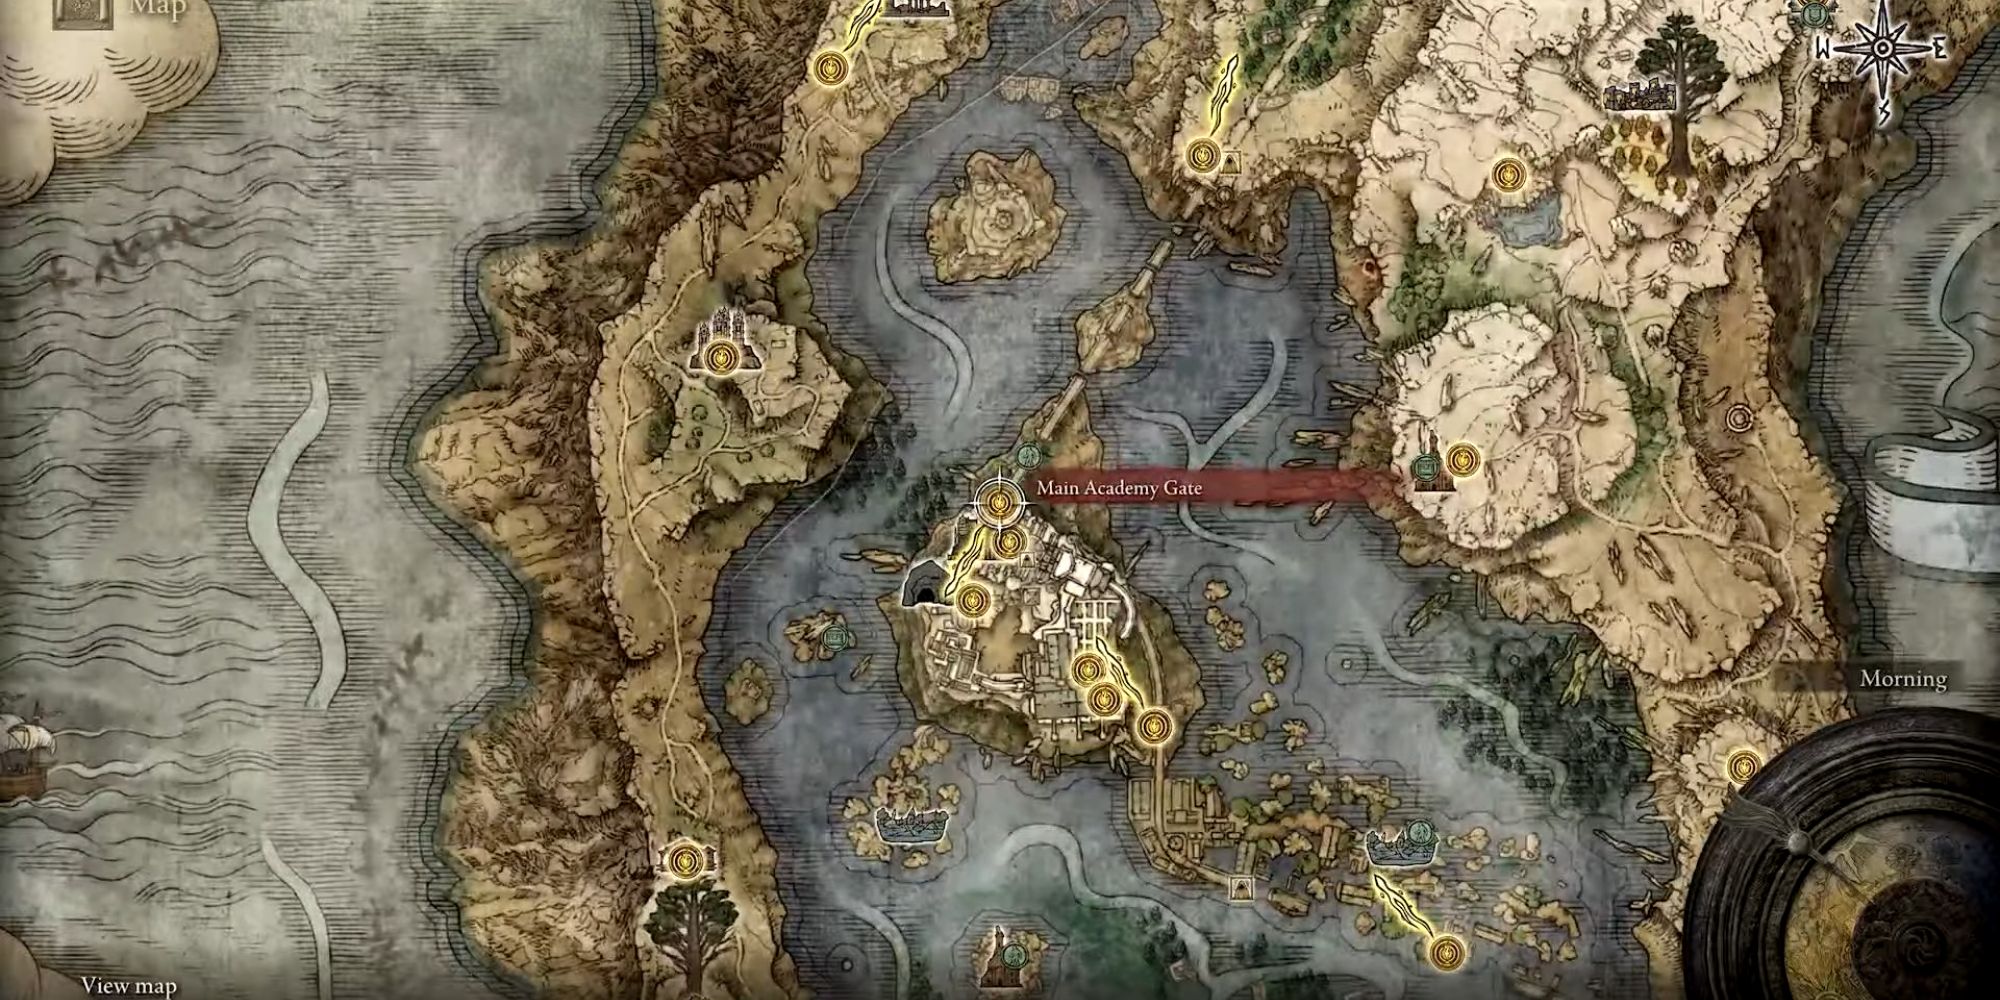 Main Academy Gate on the elden ring map